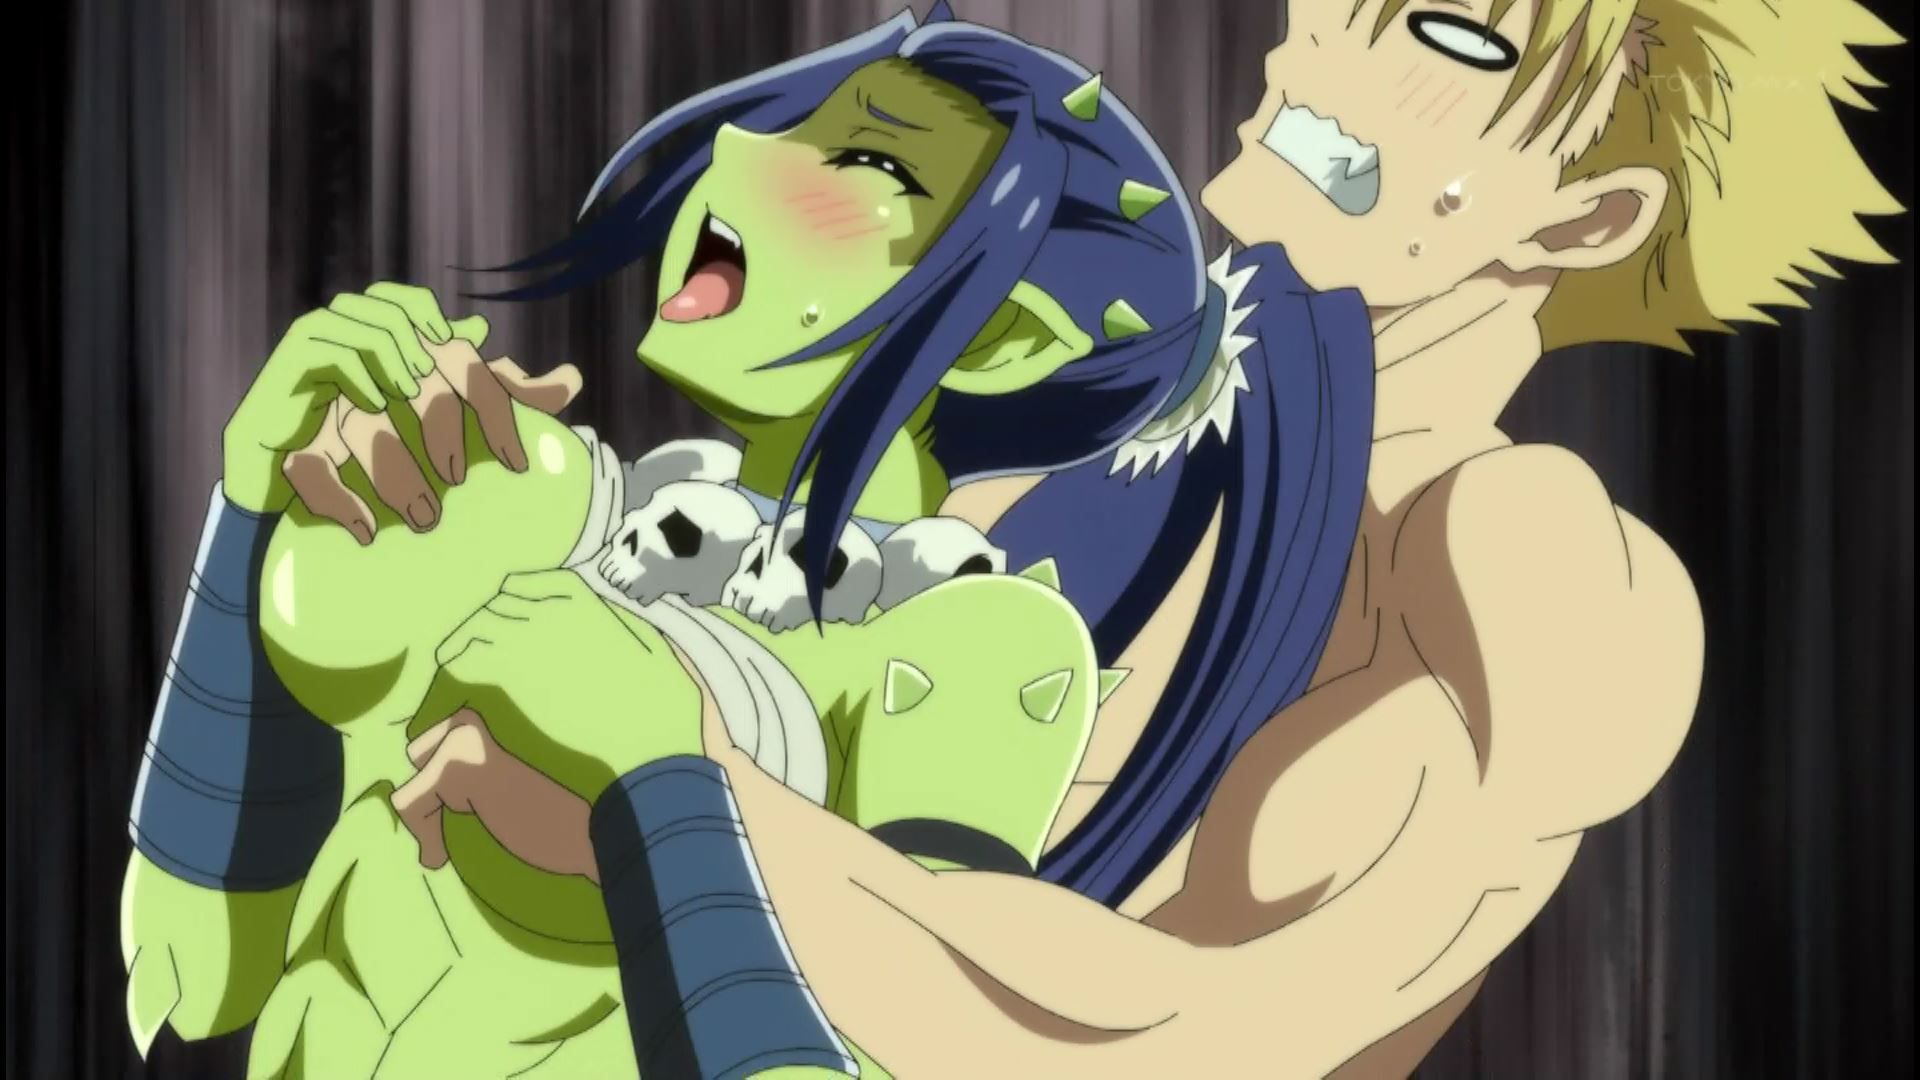 The goblin girl and ecchi scene that got estrus in episode 2 of the second season of the anime "Peter Grill and the Time of the Wise"! 15